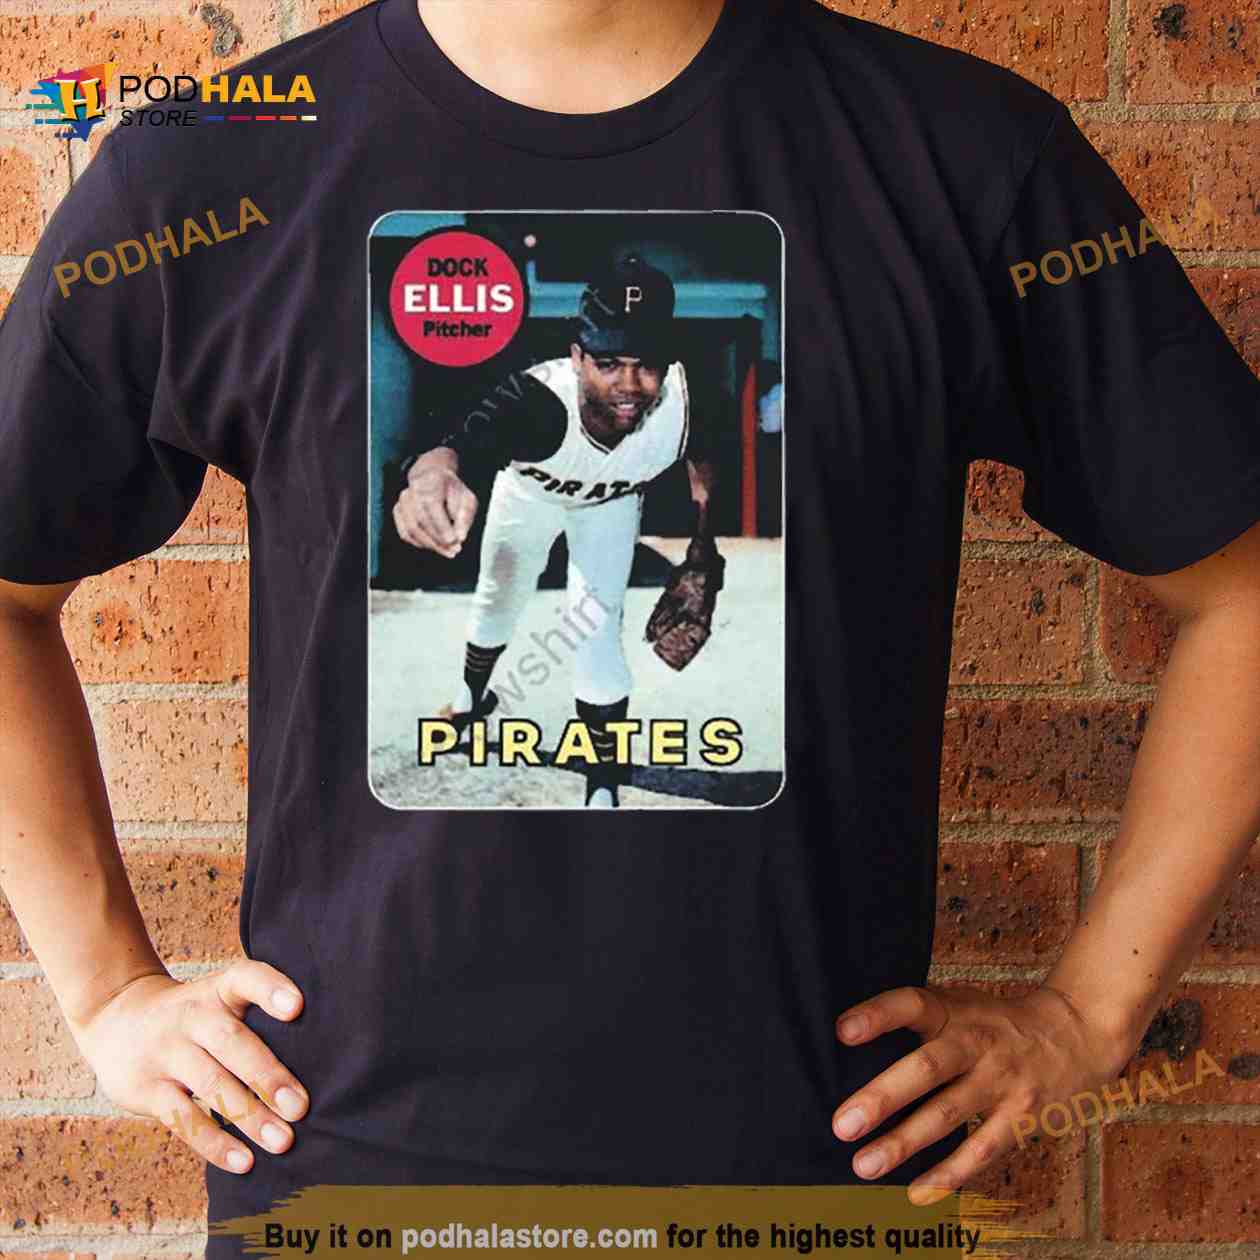 Dock ellis pitcher Pirates photo design t Shirt - Bring Your Ideas,  Thoughts And Imaginations Into Reality Today